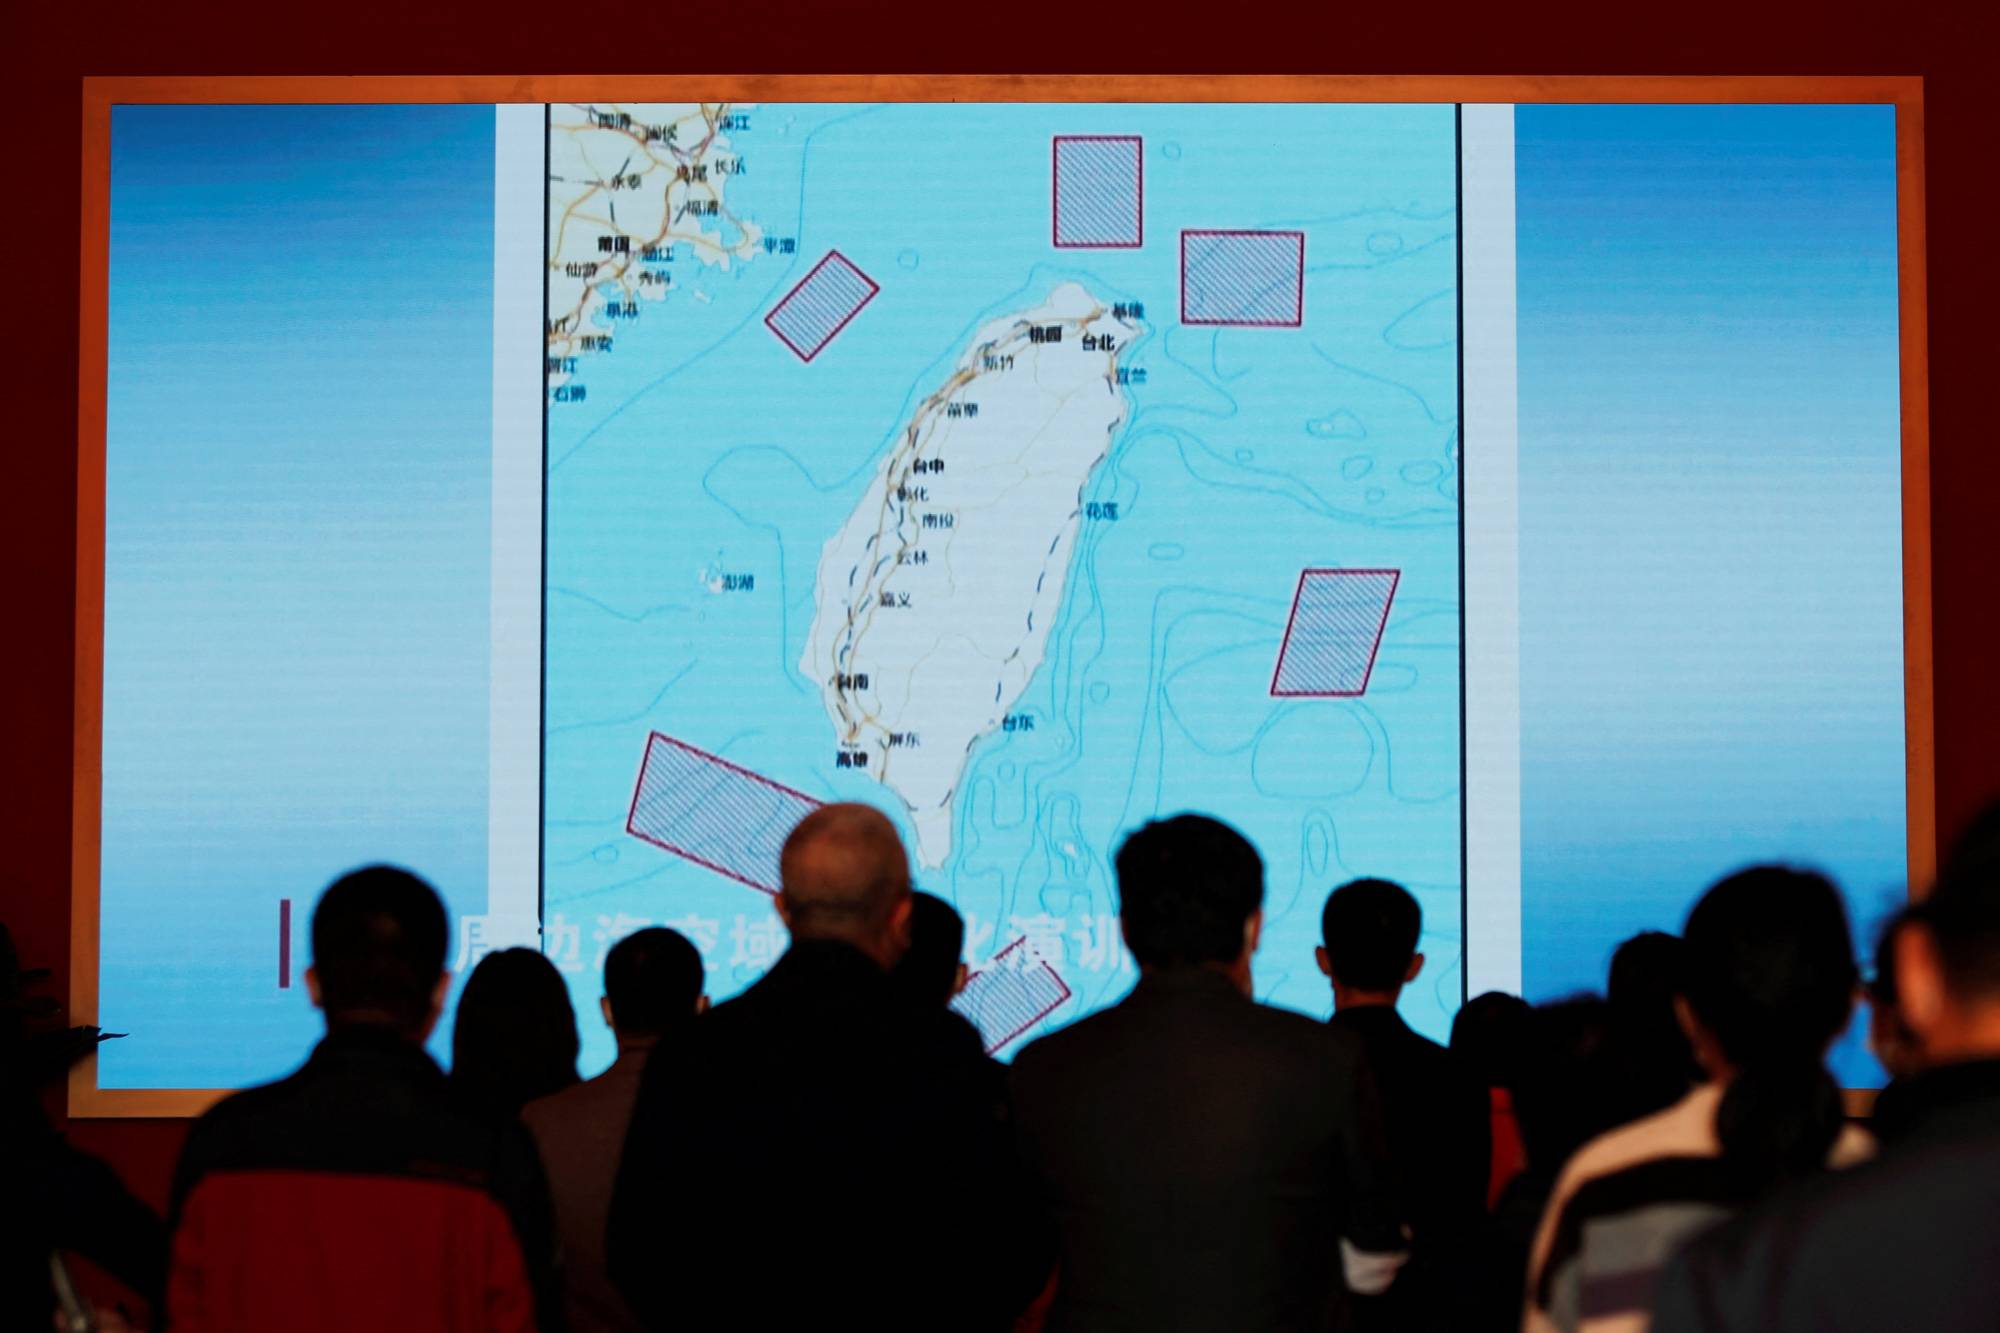 Visitors stand in front of a giant screen displaying a map of locations around Taiwan where the Chinese People's Liberation Army conducted military exercises in August, at an exhibition titled 'Forging Ahead in the New Era' during a media tour on Oct. 12, ahead of a Communist Party congress in Beijing this week. | REUTERS